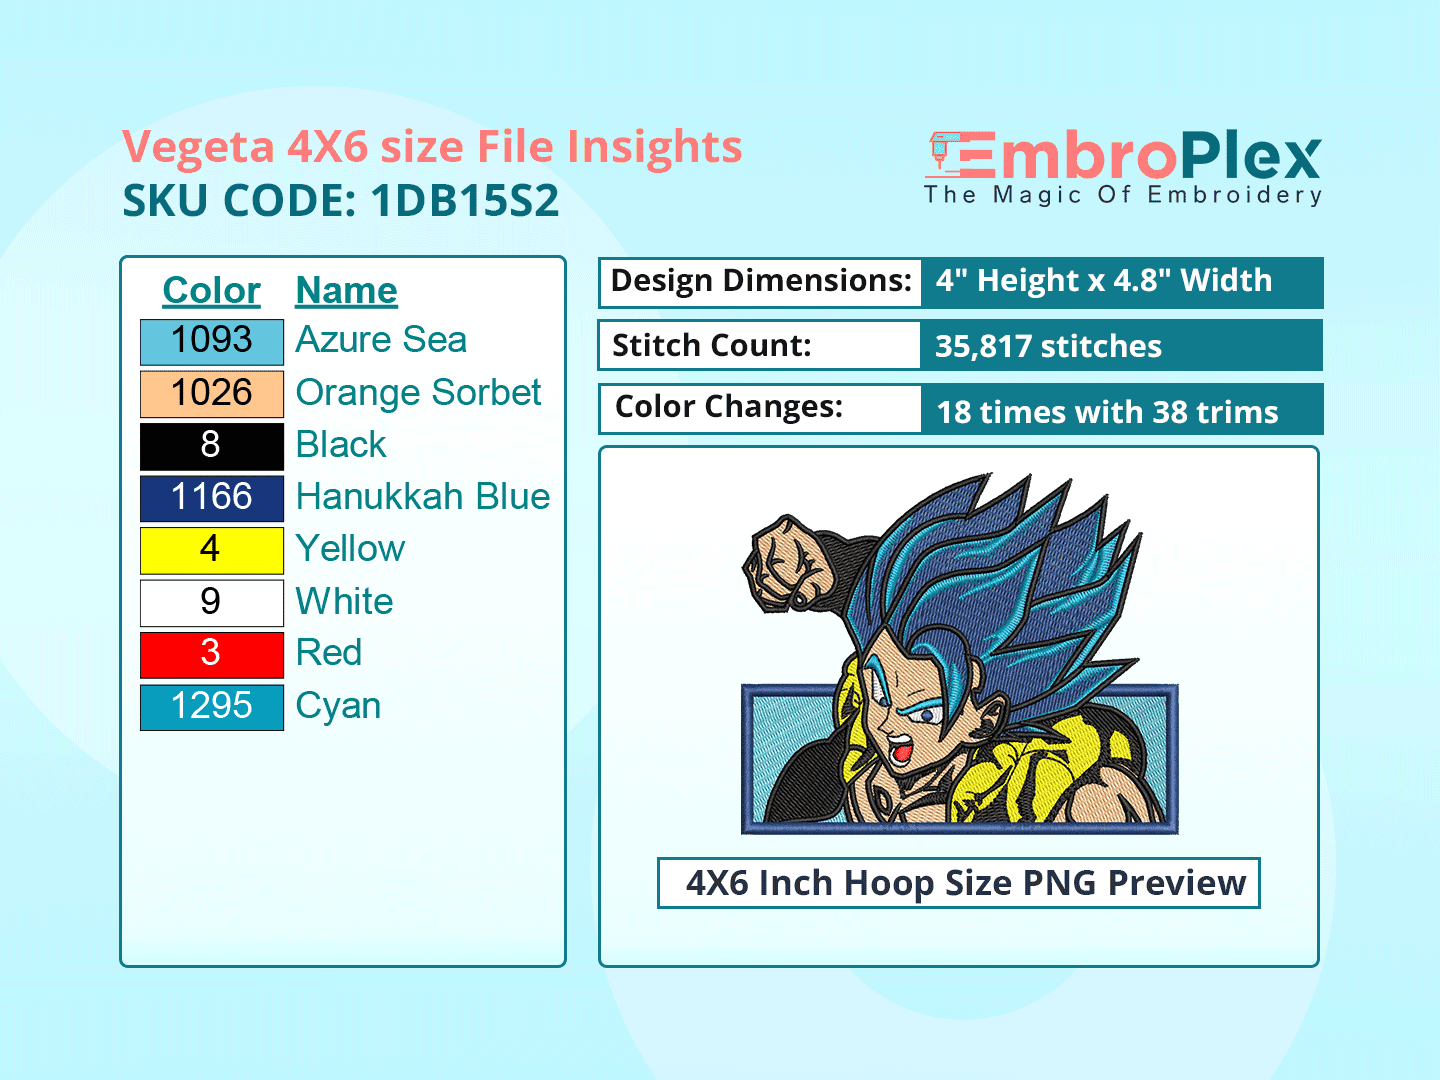 Anime-Inspired Vegeta Embroidery Design File - 4x6 Inch hoop Size Variation overview image